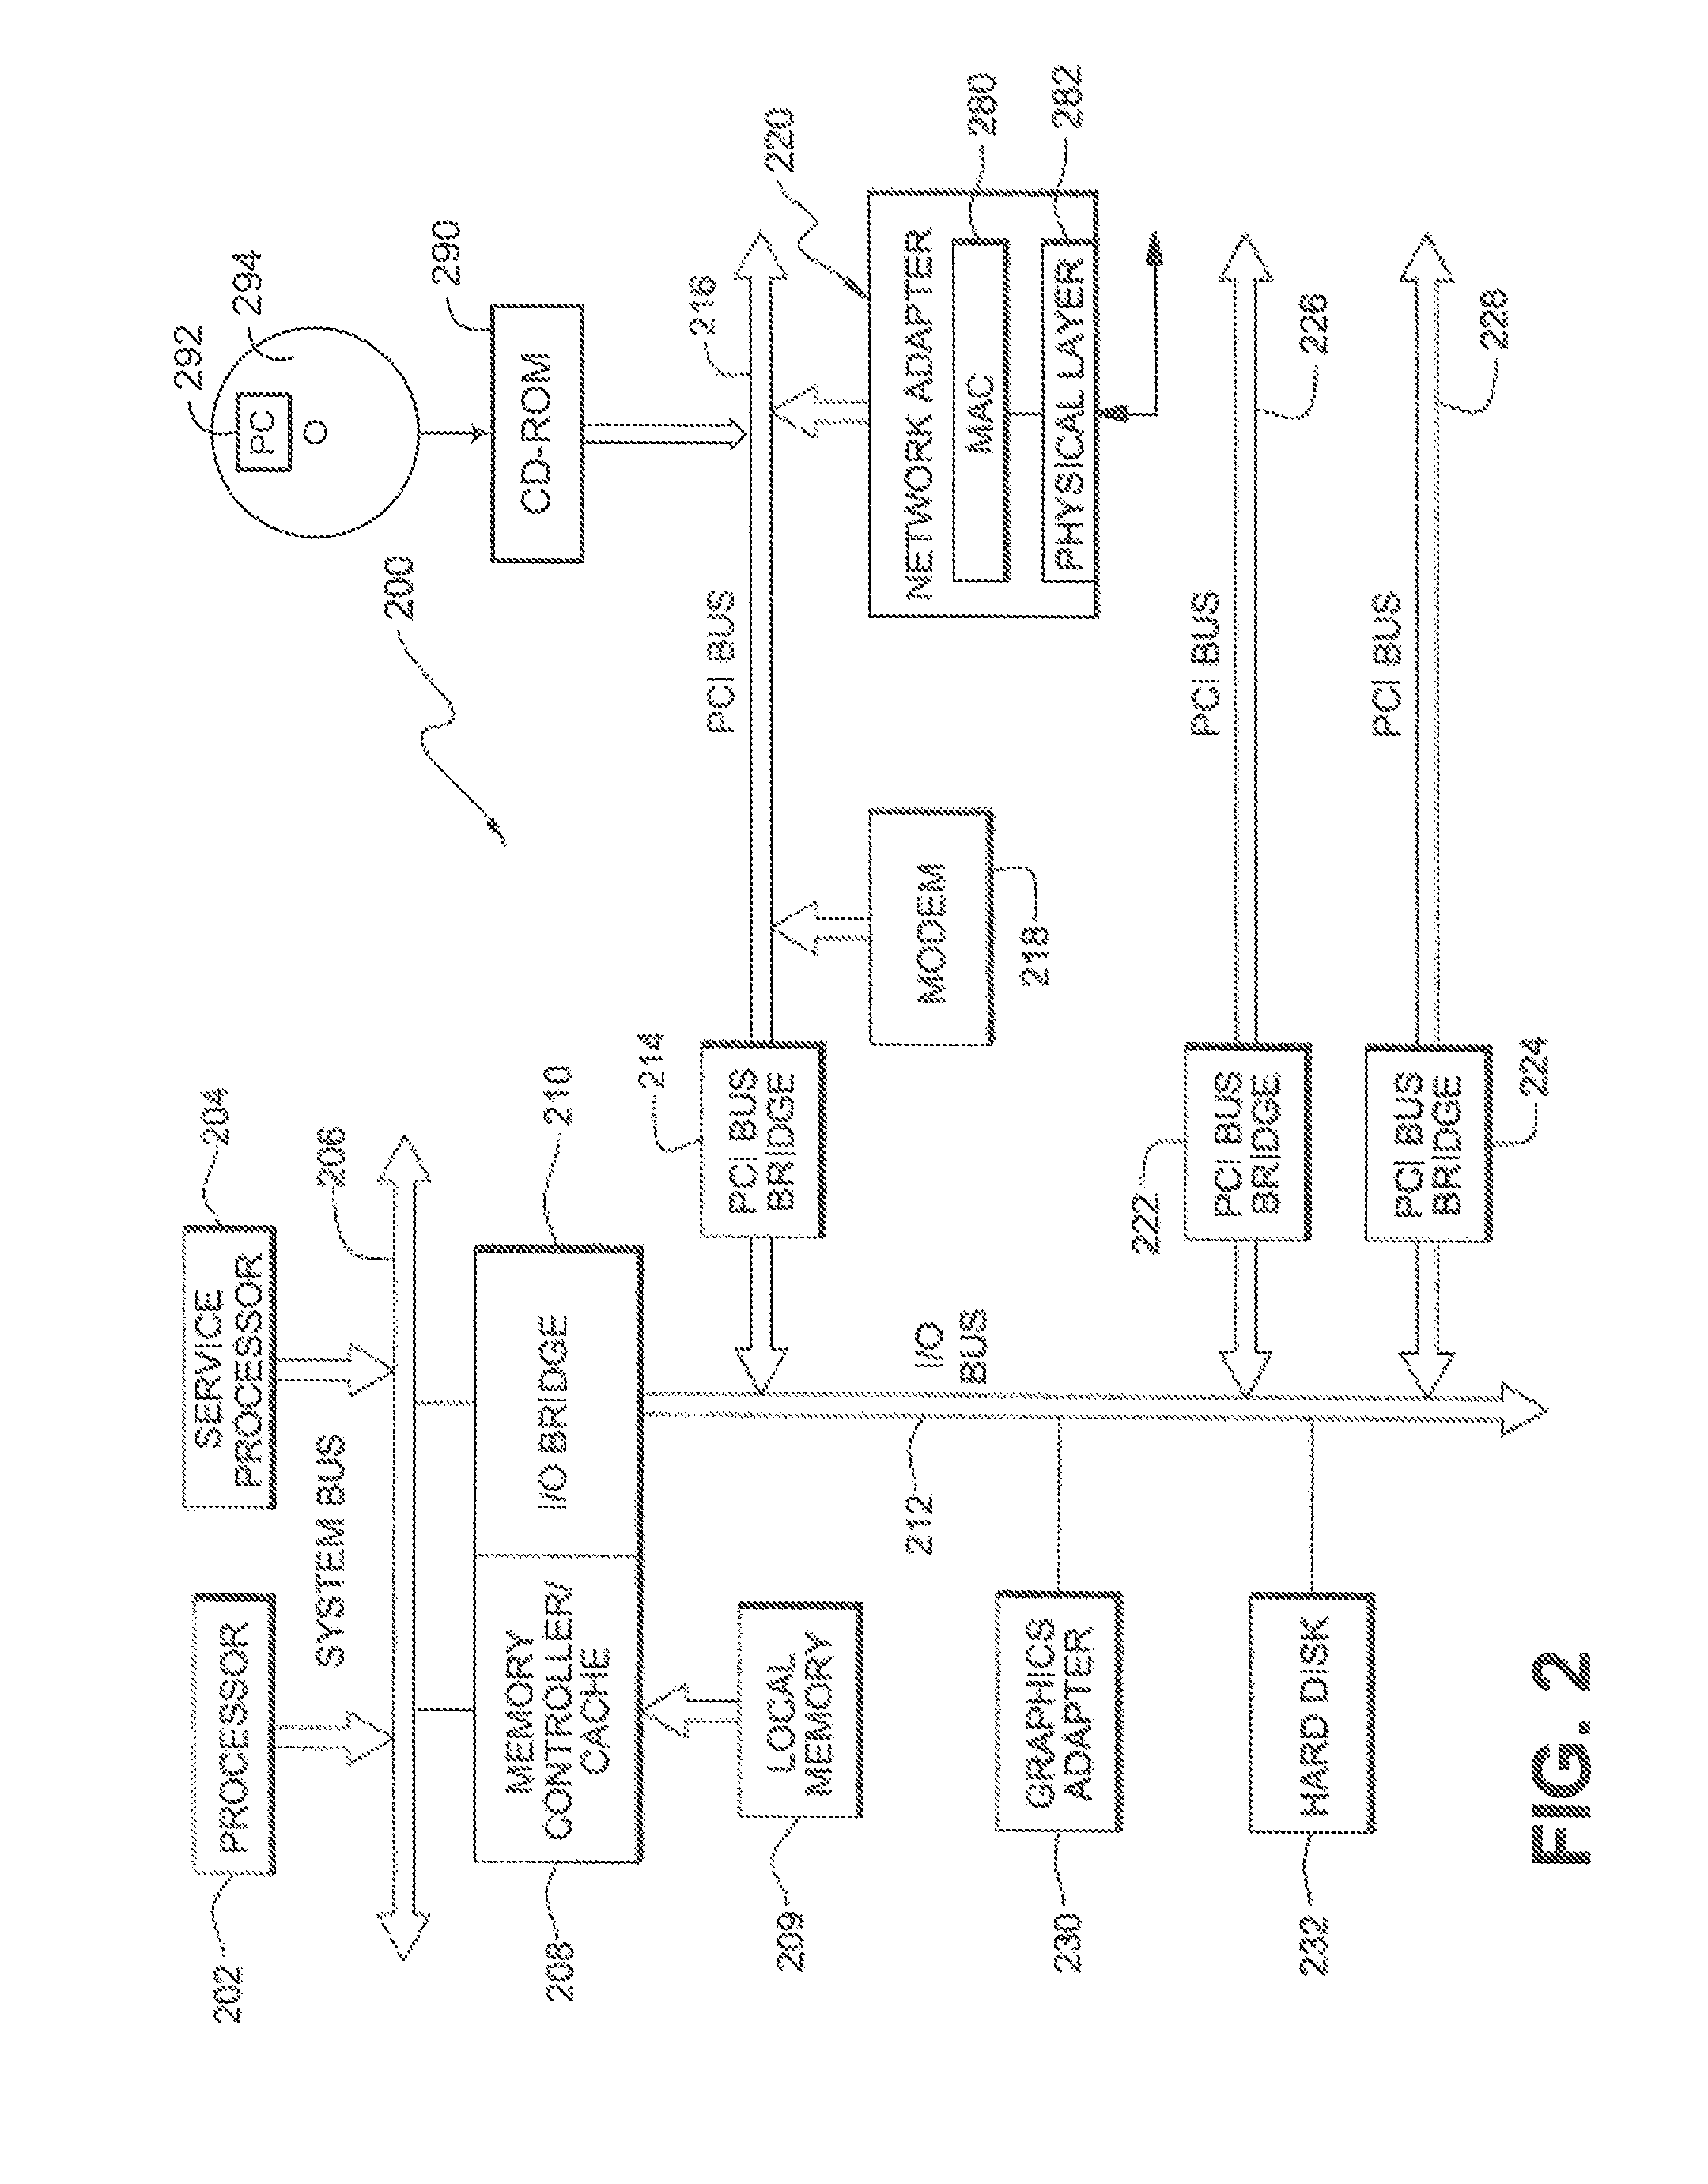 Virtualization of hardware queues in self-virtualizing input/output devices